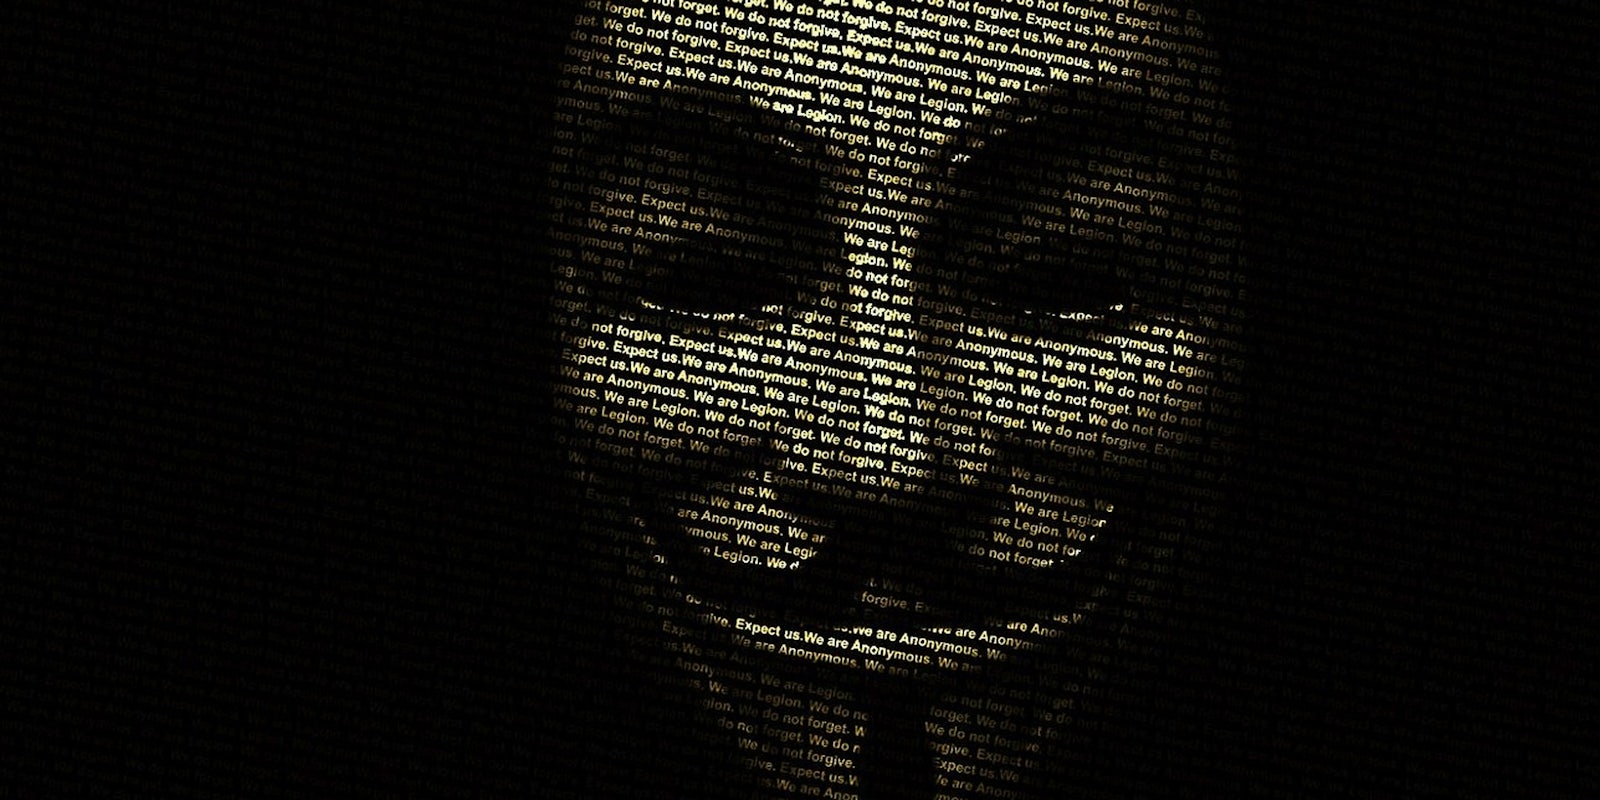 Anonymous's #OpFullerton seeks justice for Kelly Thomas